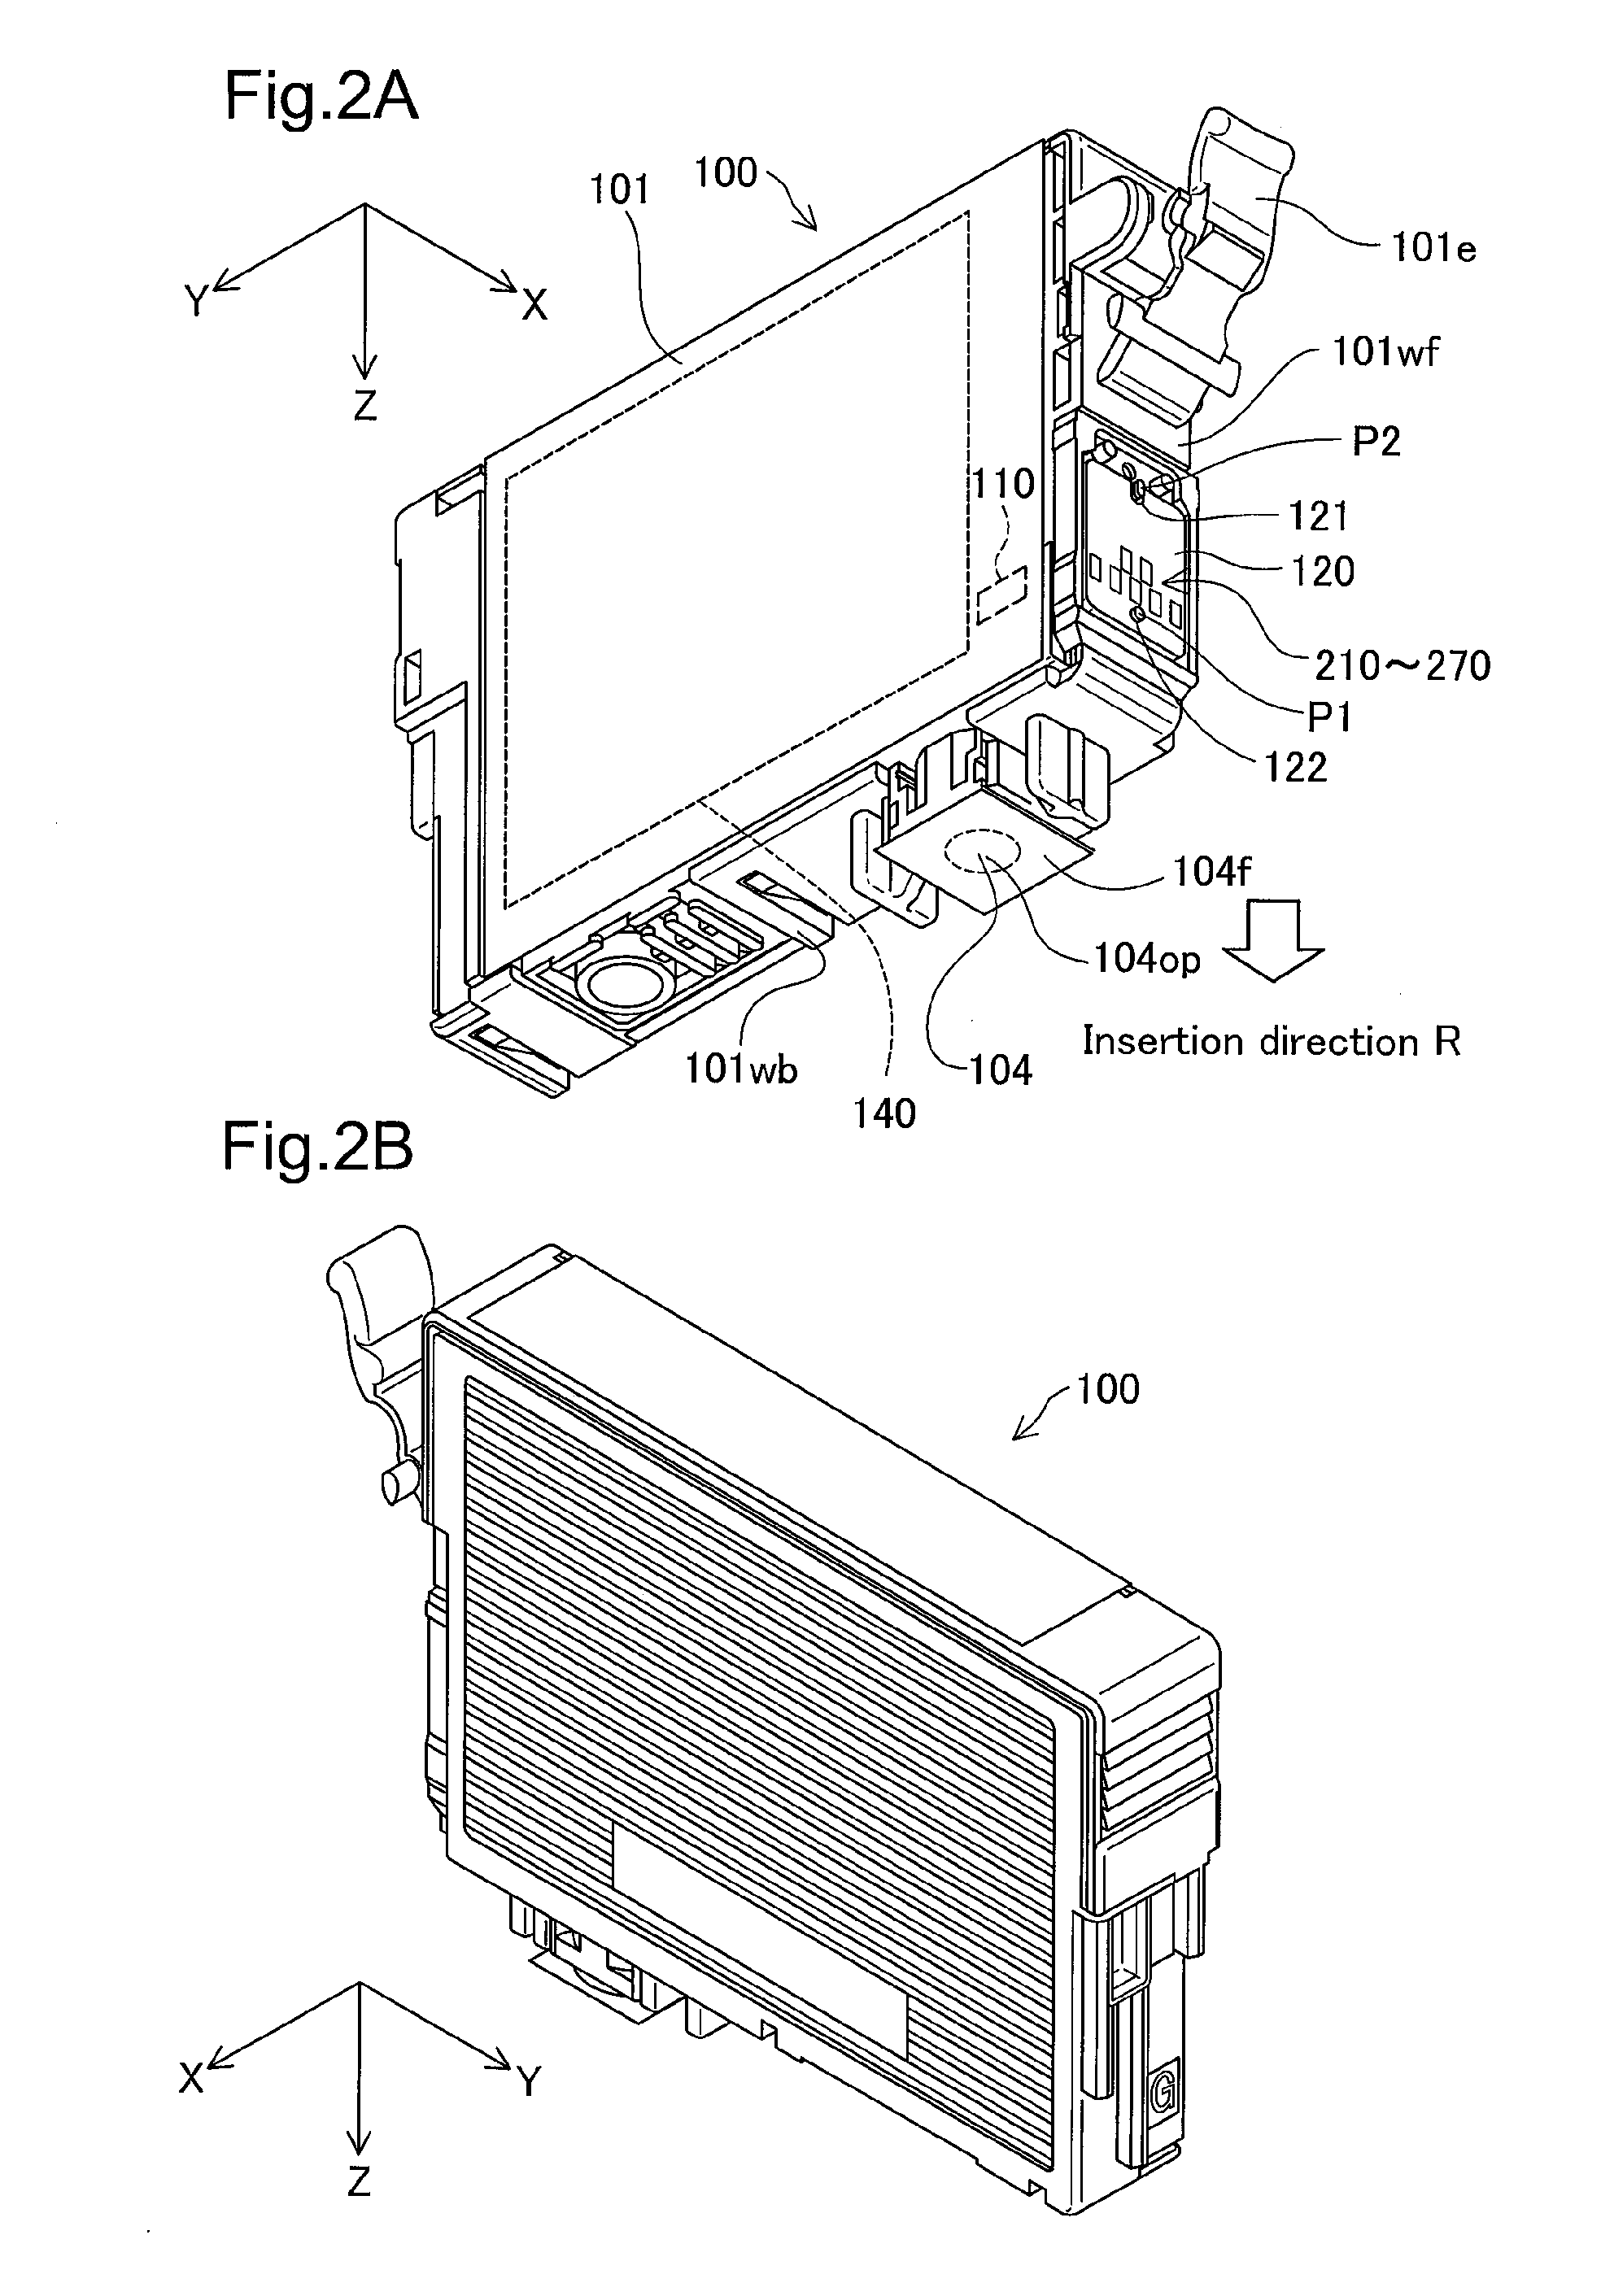 Memory device and system including a memory device electronically connectable to a host circuit